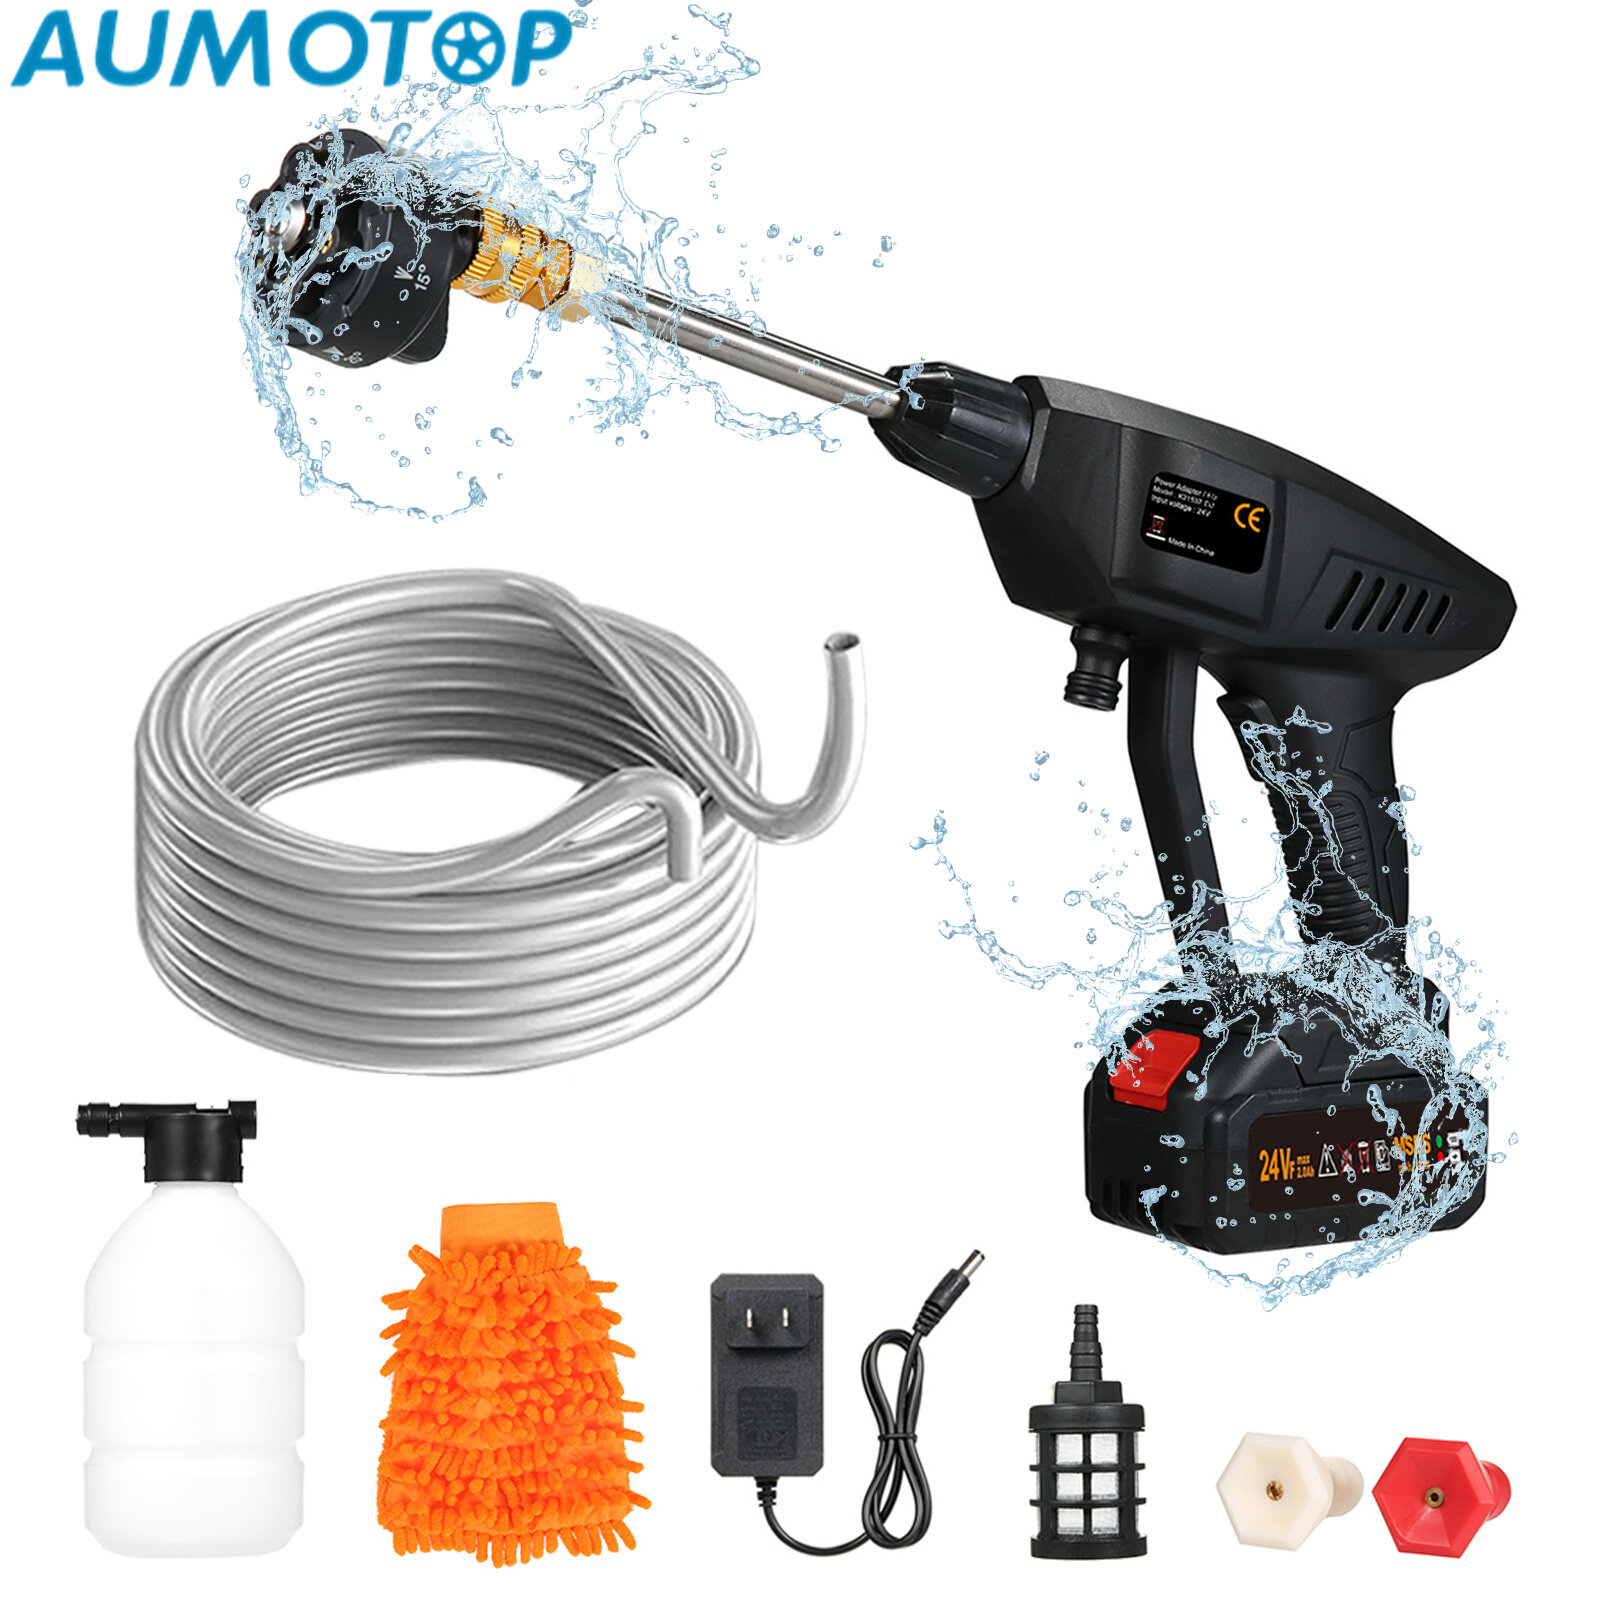 Multi-Functional Waterproof Cordless Power Washer with 6-in